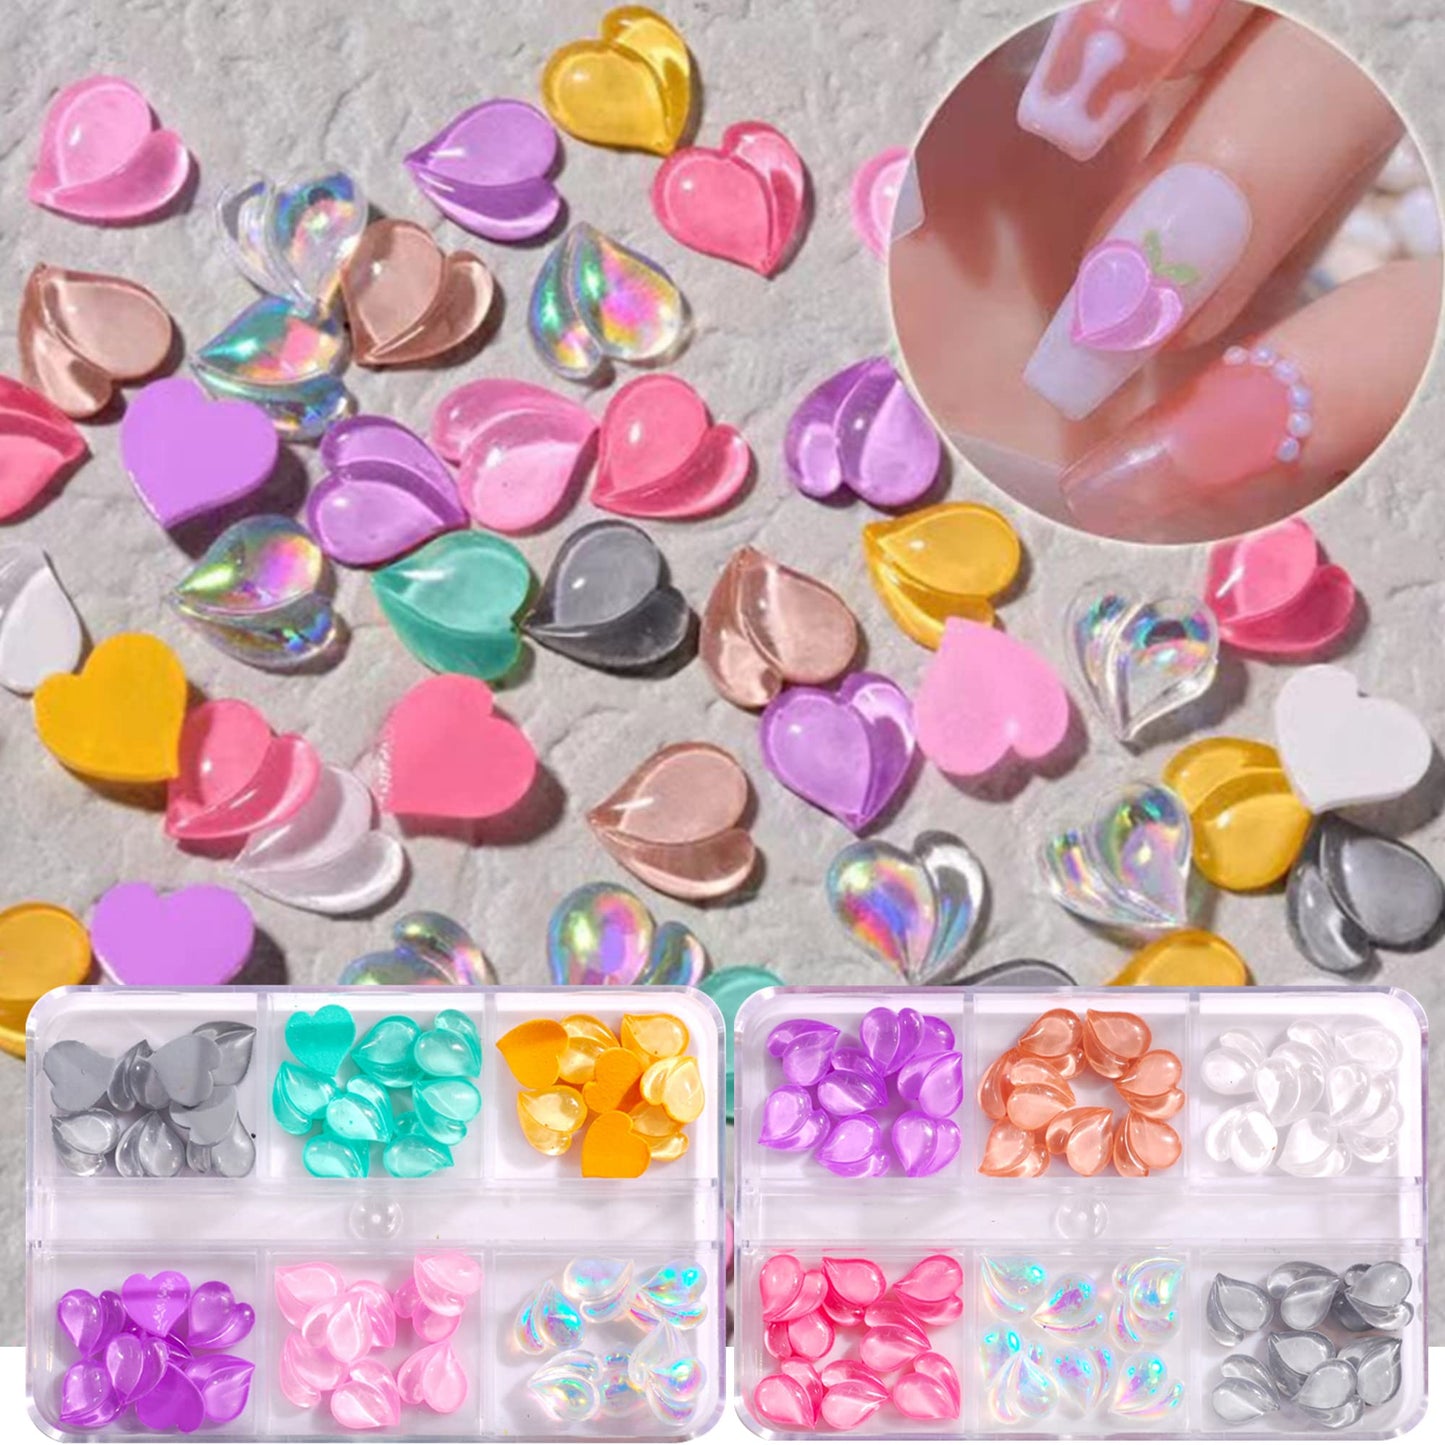 Hisenlee AB Color Crystal Nail Art Rhinestone Sparkle Acrylic Manicure Accessories For DIY Nail Art Decorations 4 Boxes/Set (Peach)